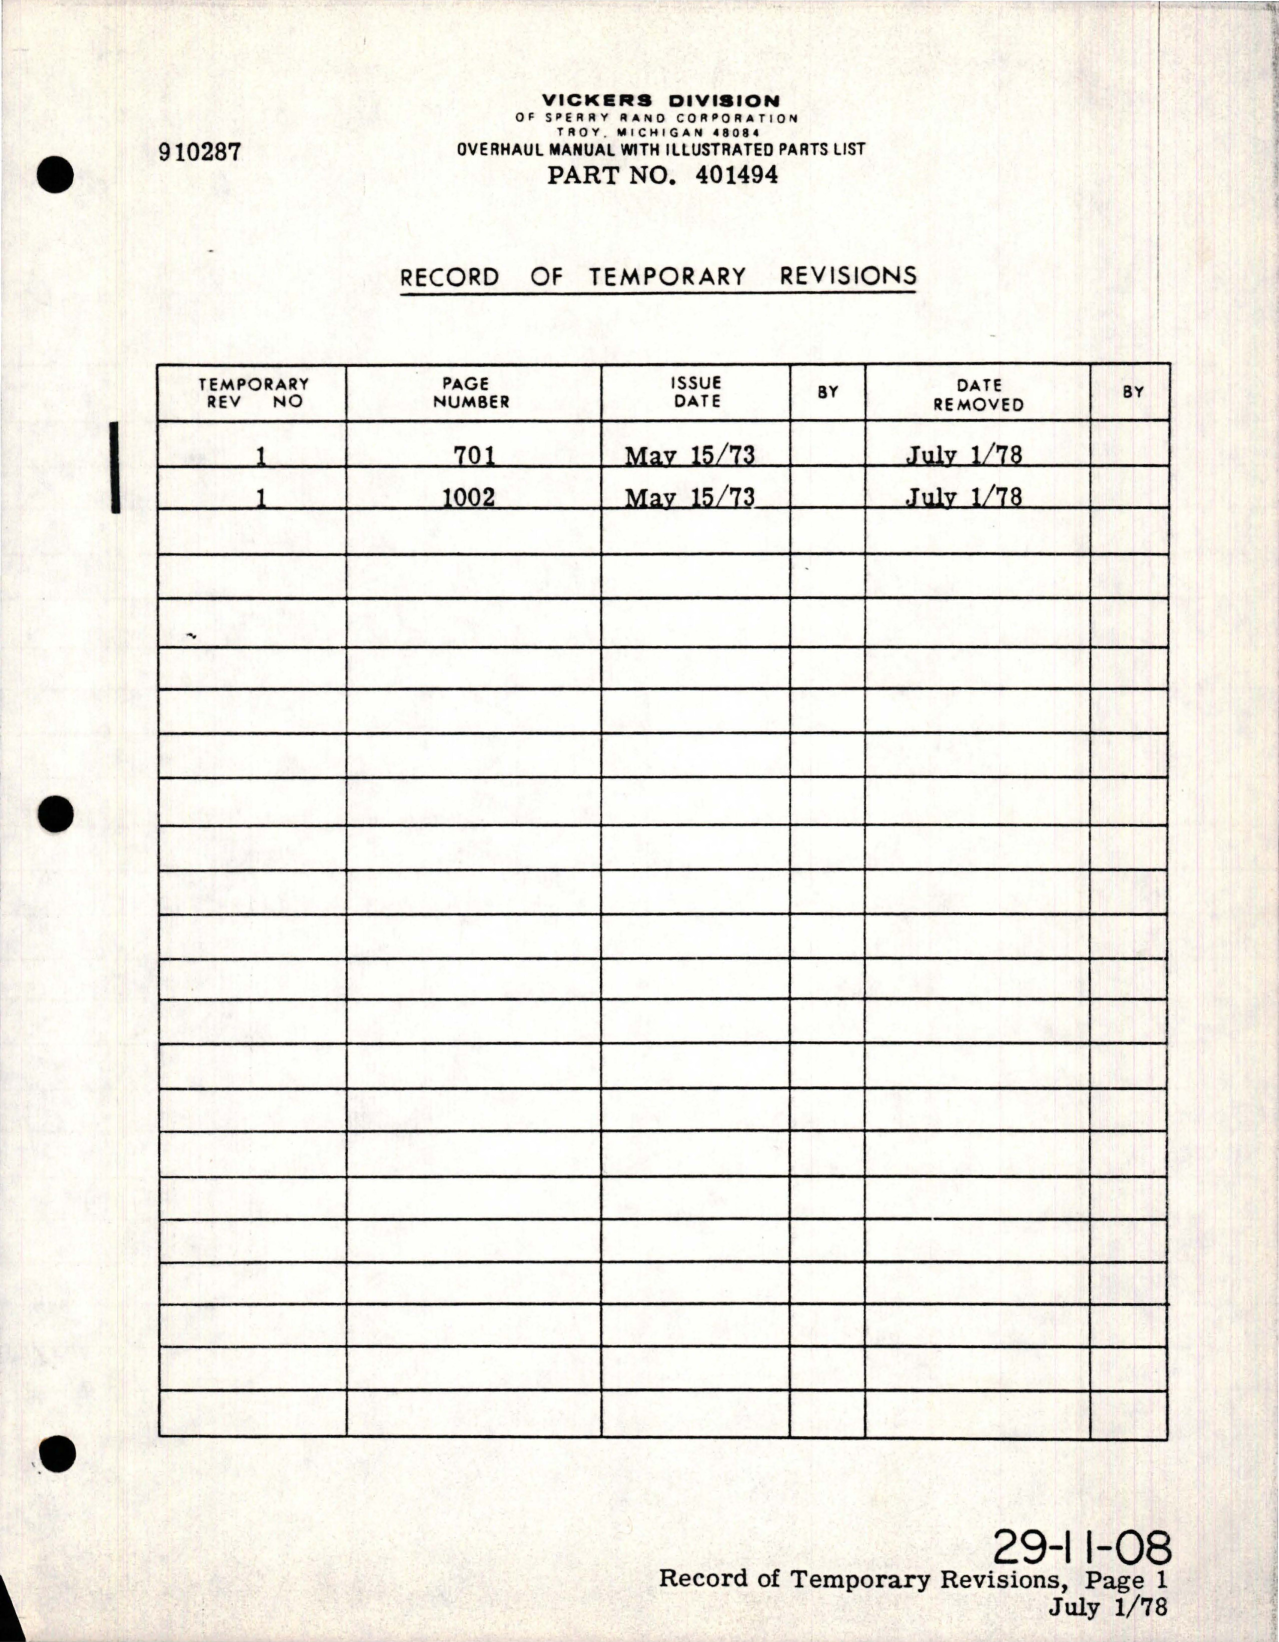 Sample page 5 from AirCorps Library document: Maintenance Manual with Illustrated Parts List for Variable Displacement Hydraulic Motorpump Assy - Model MPEV3-022-14C, MPEV3-022-14D, and MPEV3-022-14E